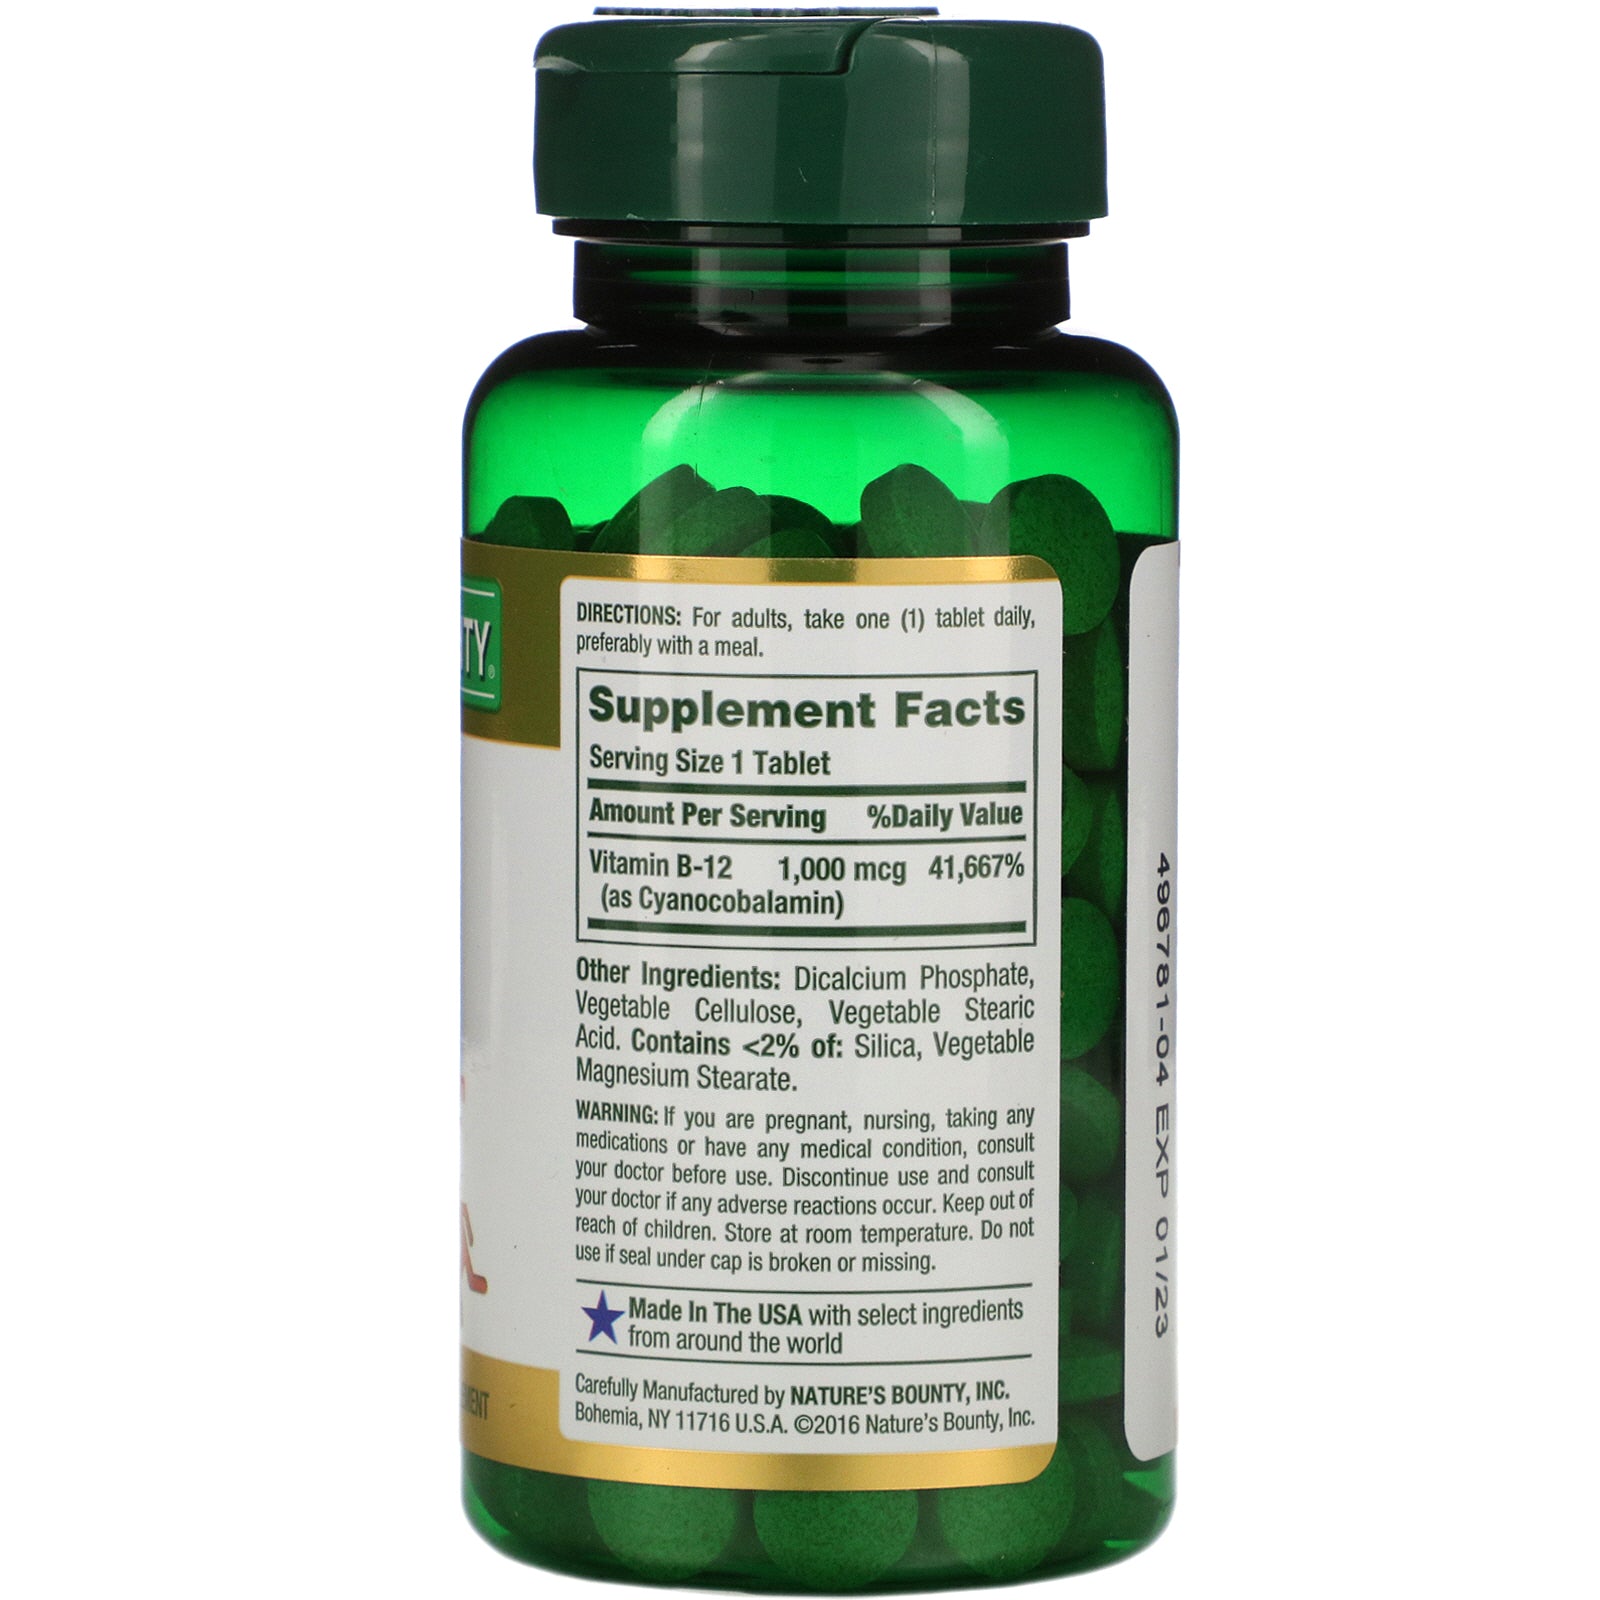 Nature's Bounty, B-12, 1,000 mcg, 200 Coated Tablets